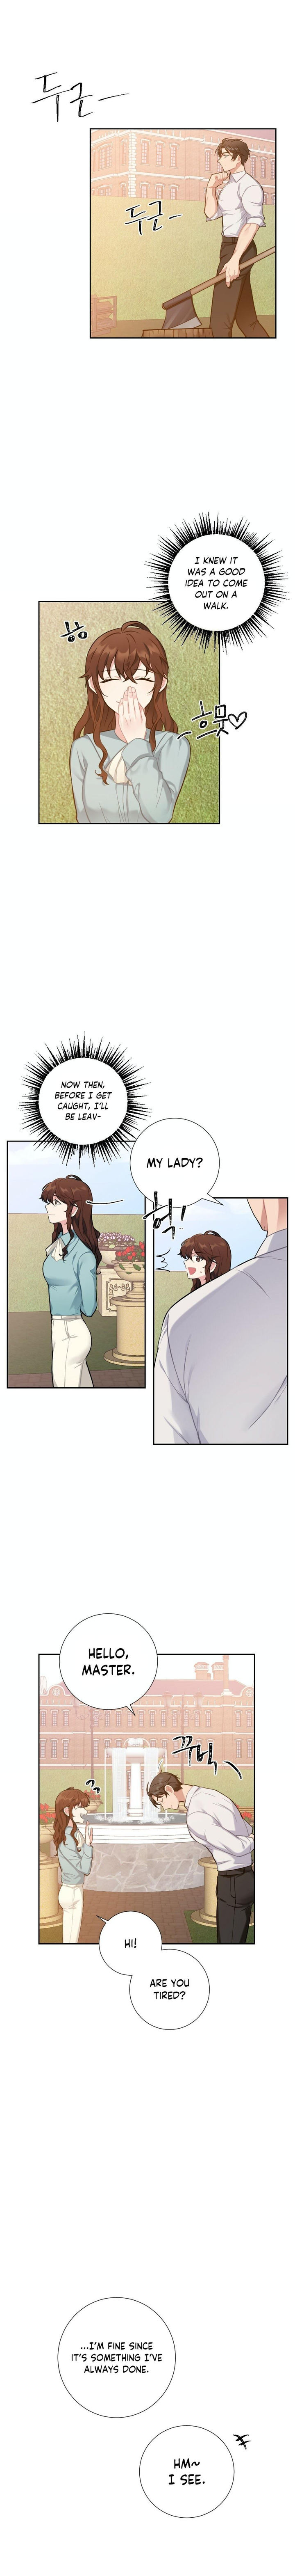 Lady & Maid - Chapter 9 Page 3